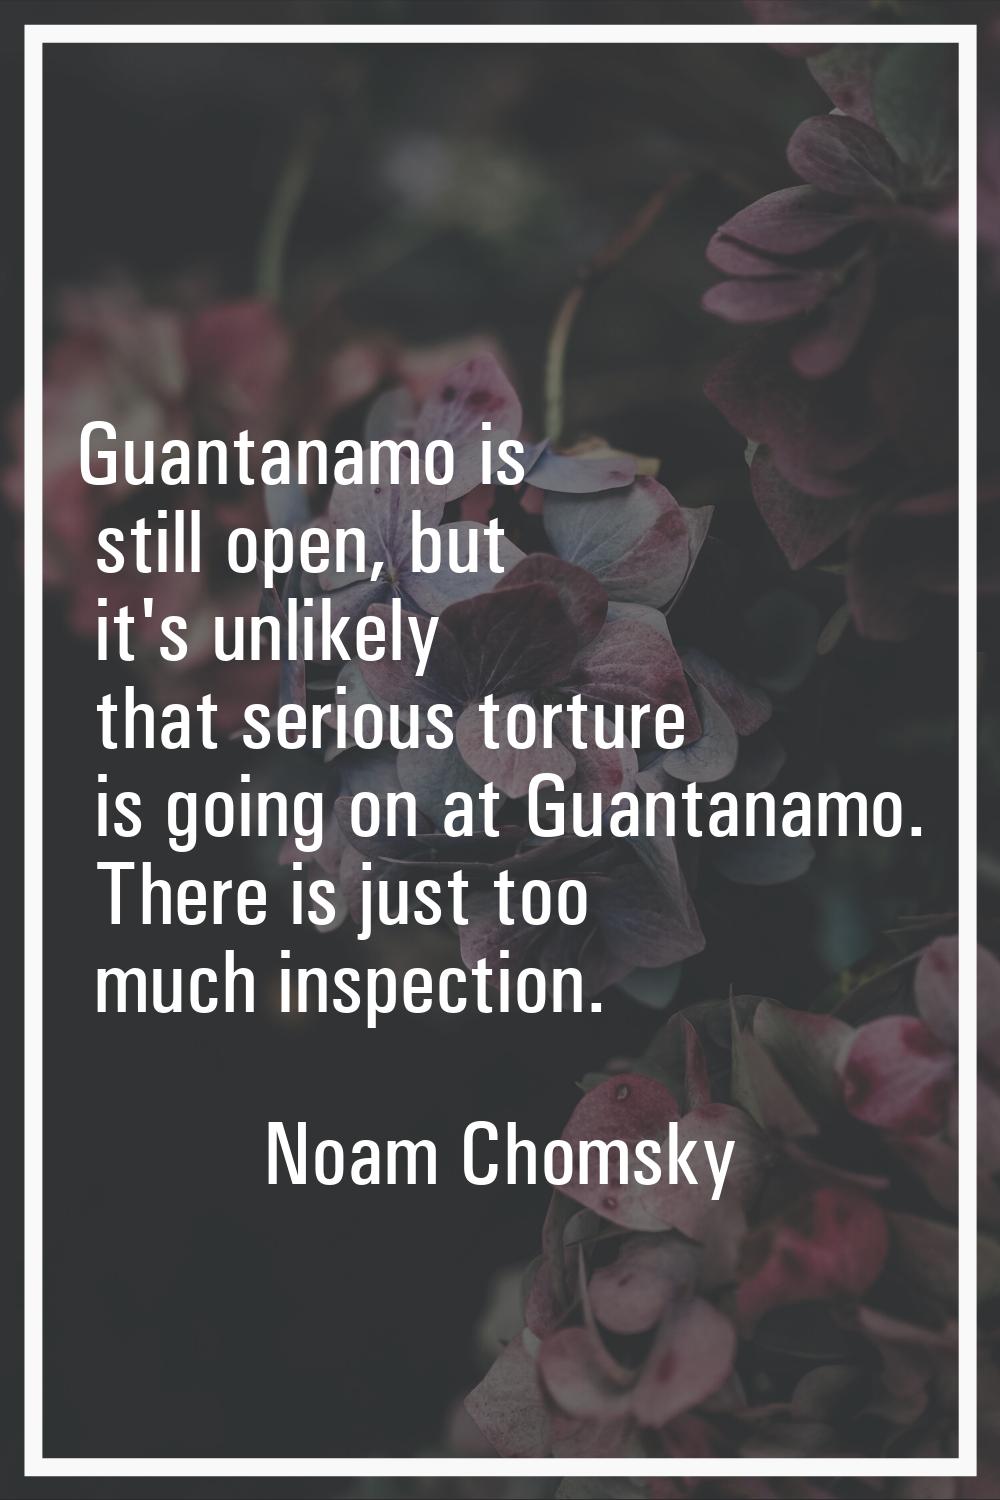 Guantanamo is still open, but it's unlikely that serious torture is going on at Guantanamo. There i